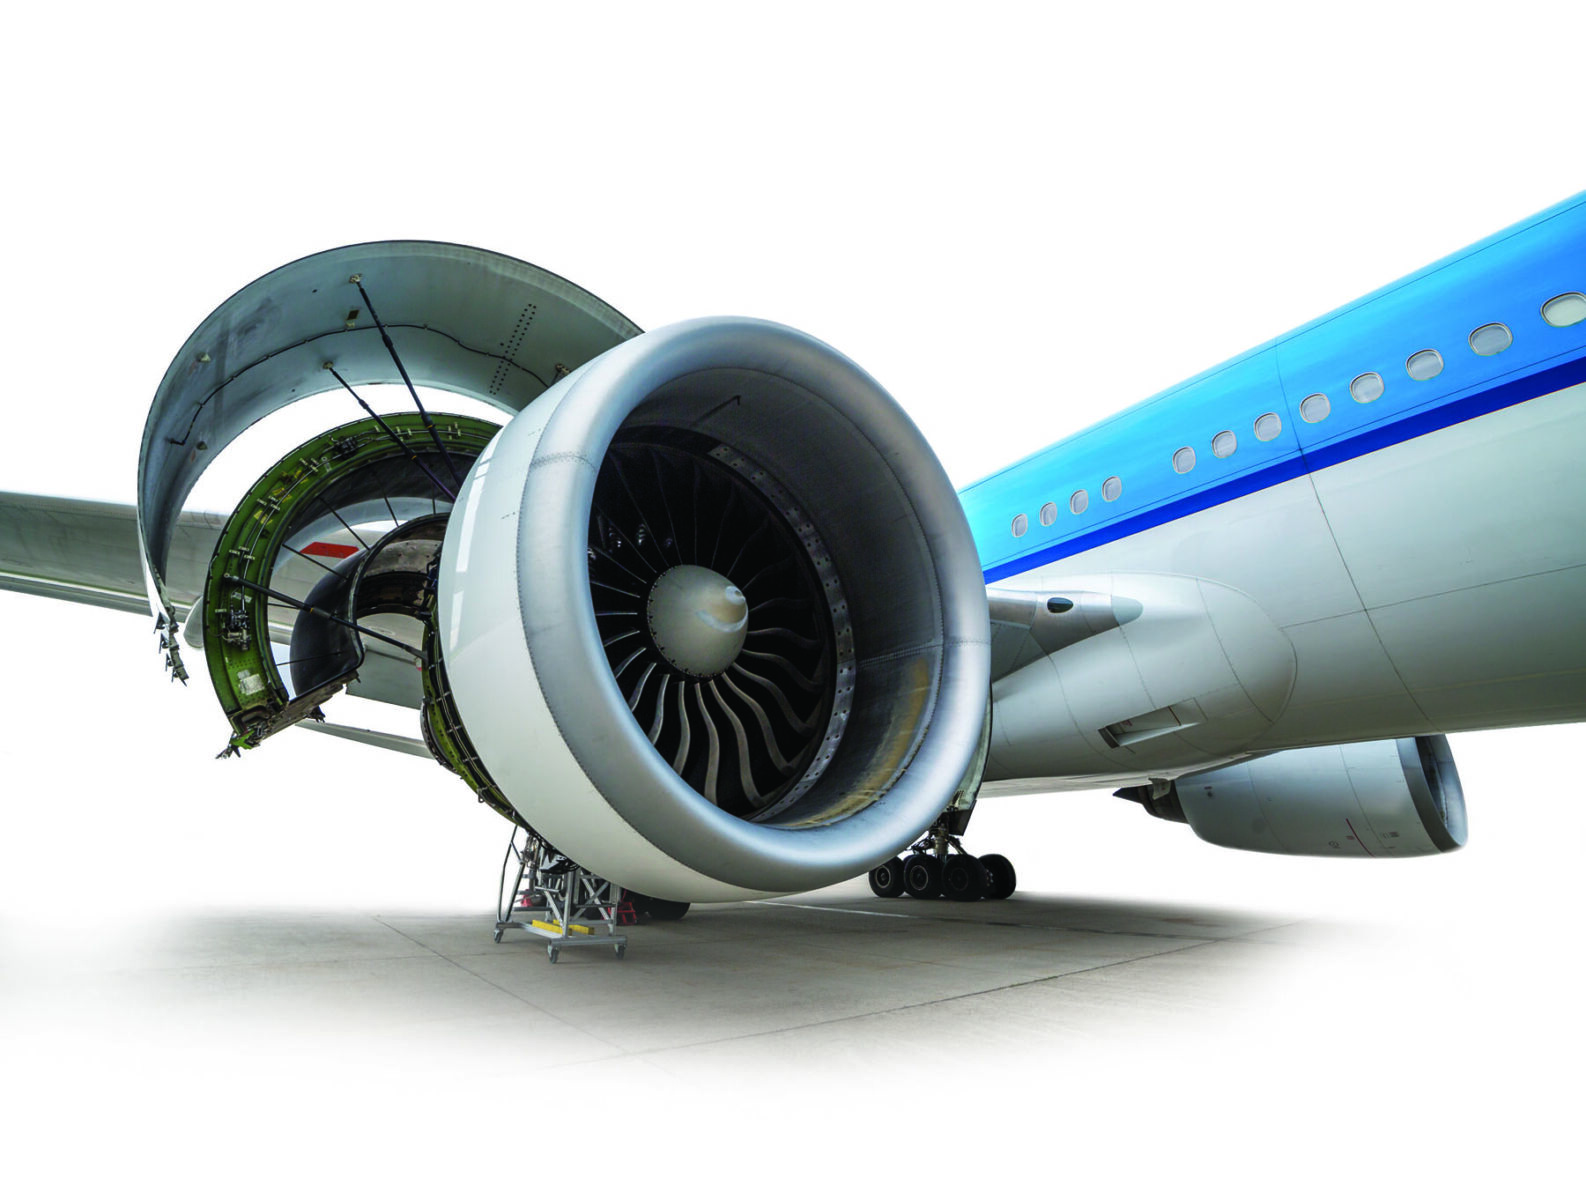 Solenoid valves protect tank pressures in critical aerospace applications